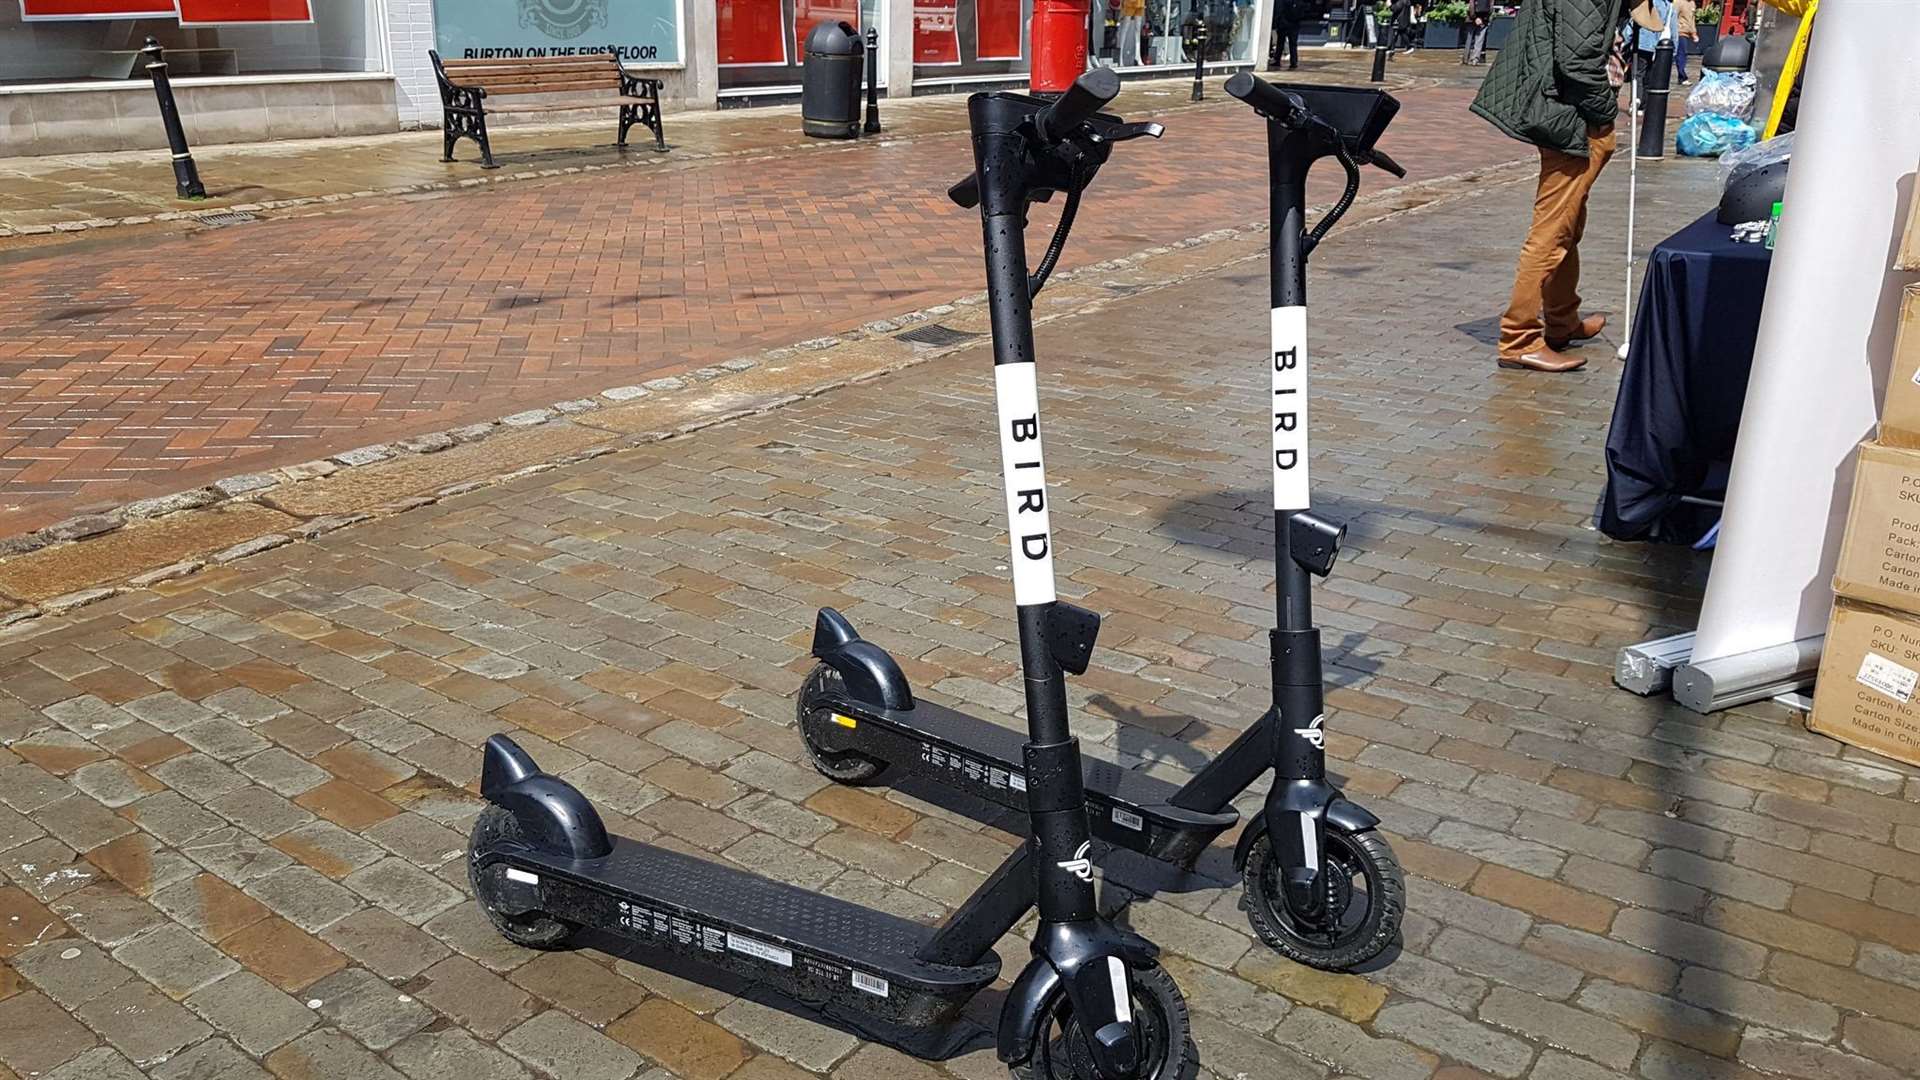 A government pilot scheme saw e-scooters brought into Canterbury in 2020 for the public to use